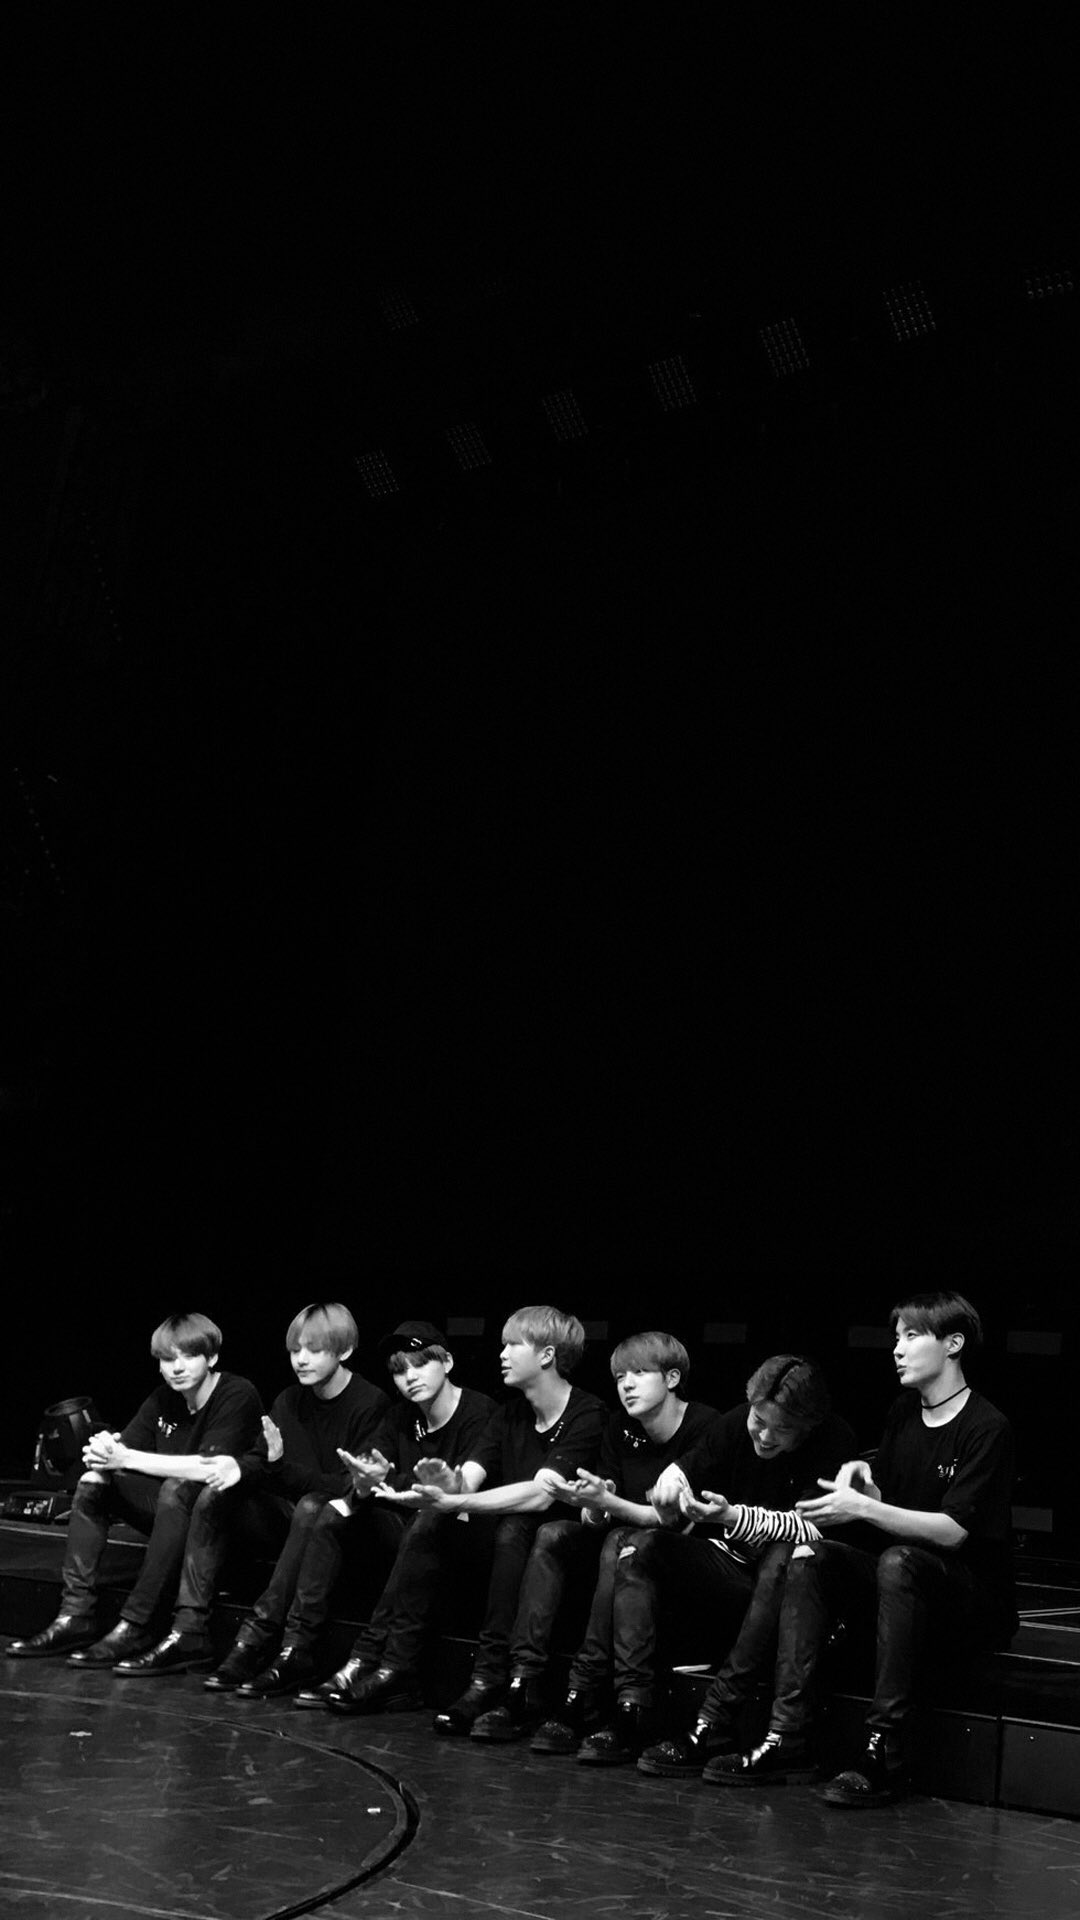  BTS  Black  And White Aesthetic  Wallpapers  Wallpaper  Cave